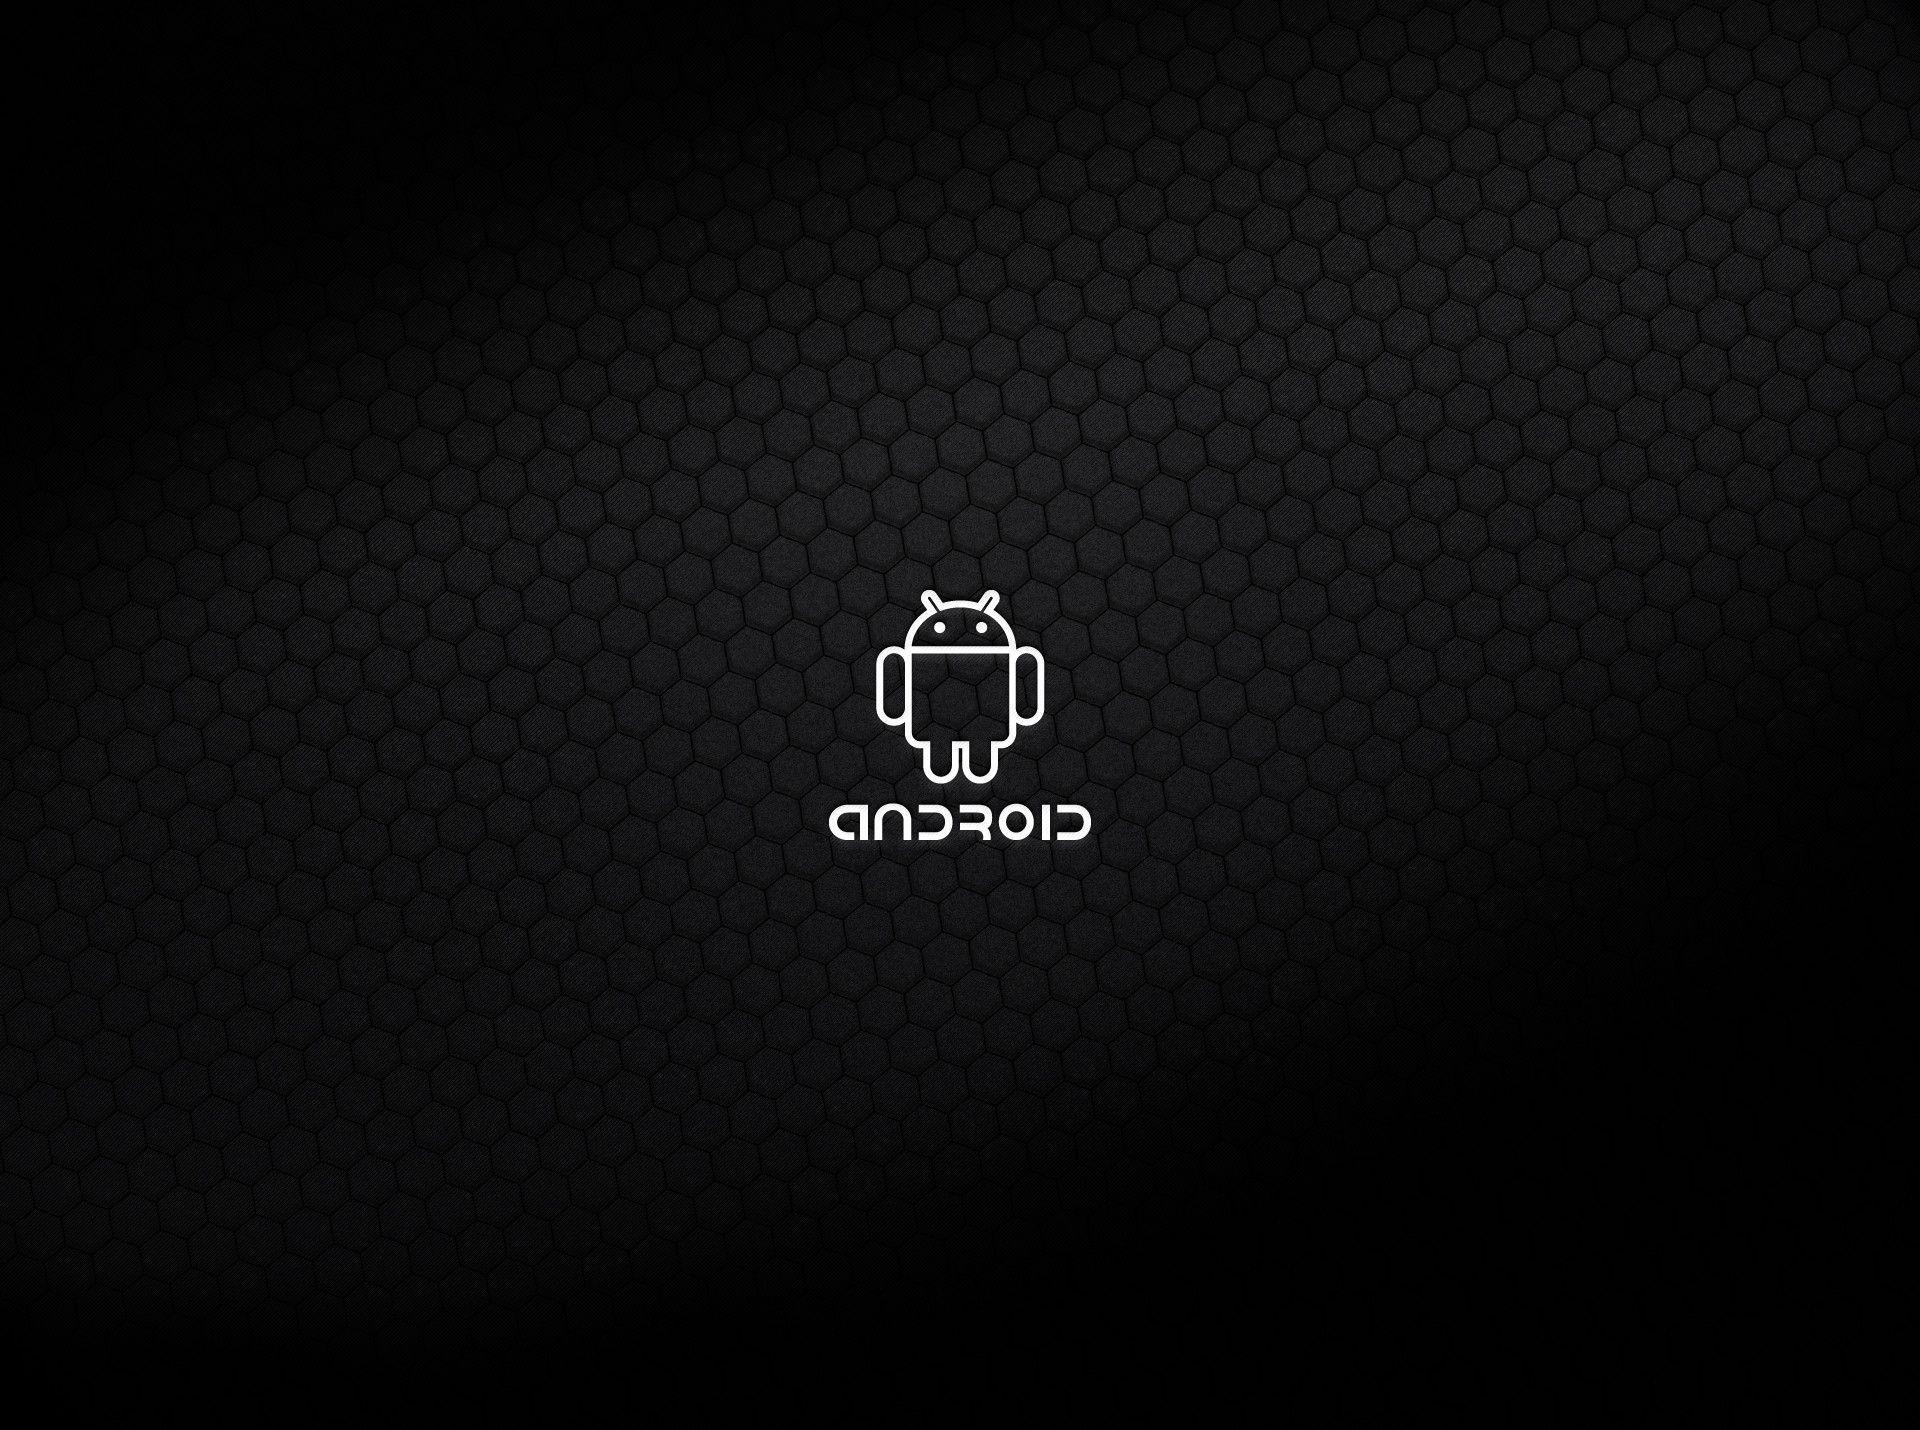 Wallpaper For > Android Phone Wallpaper Black